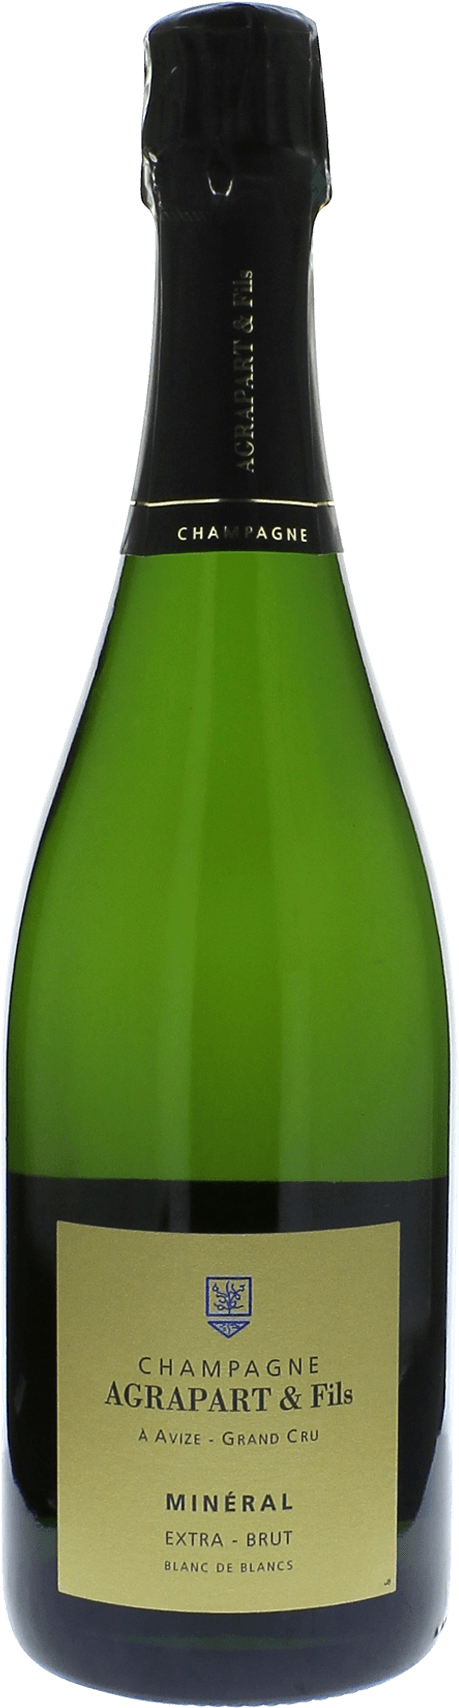 Agrapart  mineral extra brut blanc de blancs 2009  Agrapart & Fils, Champagne